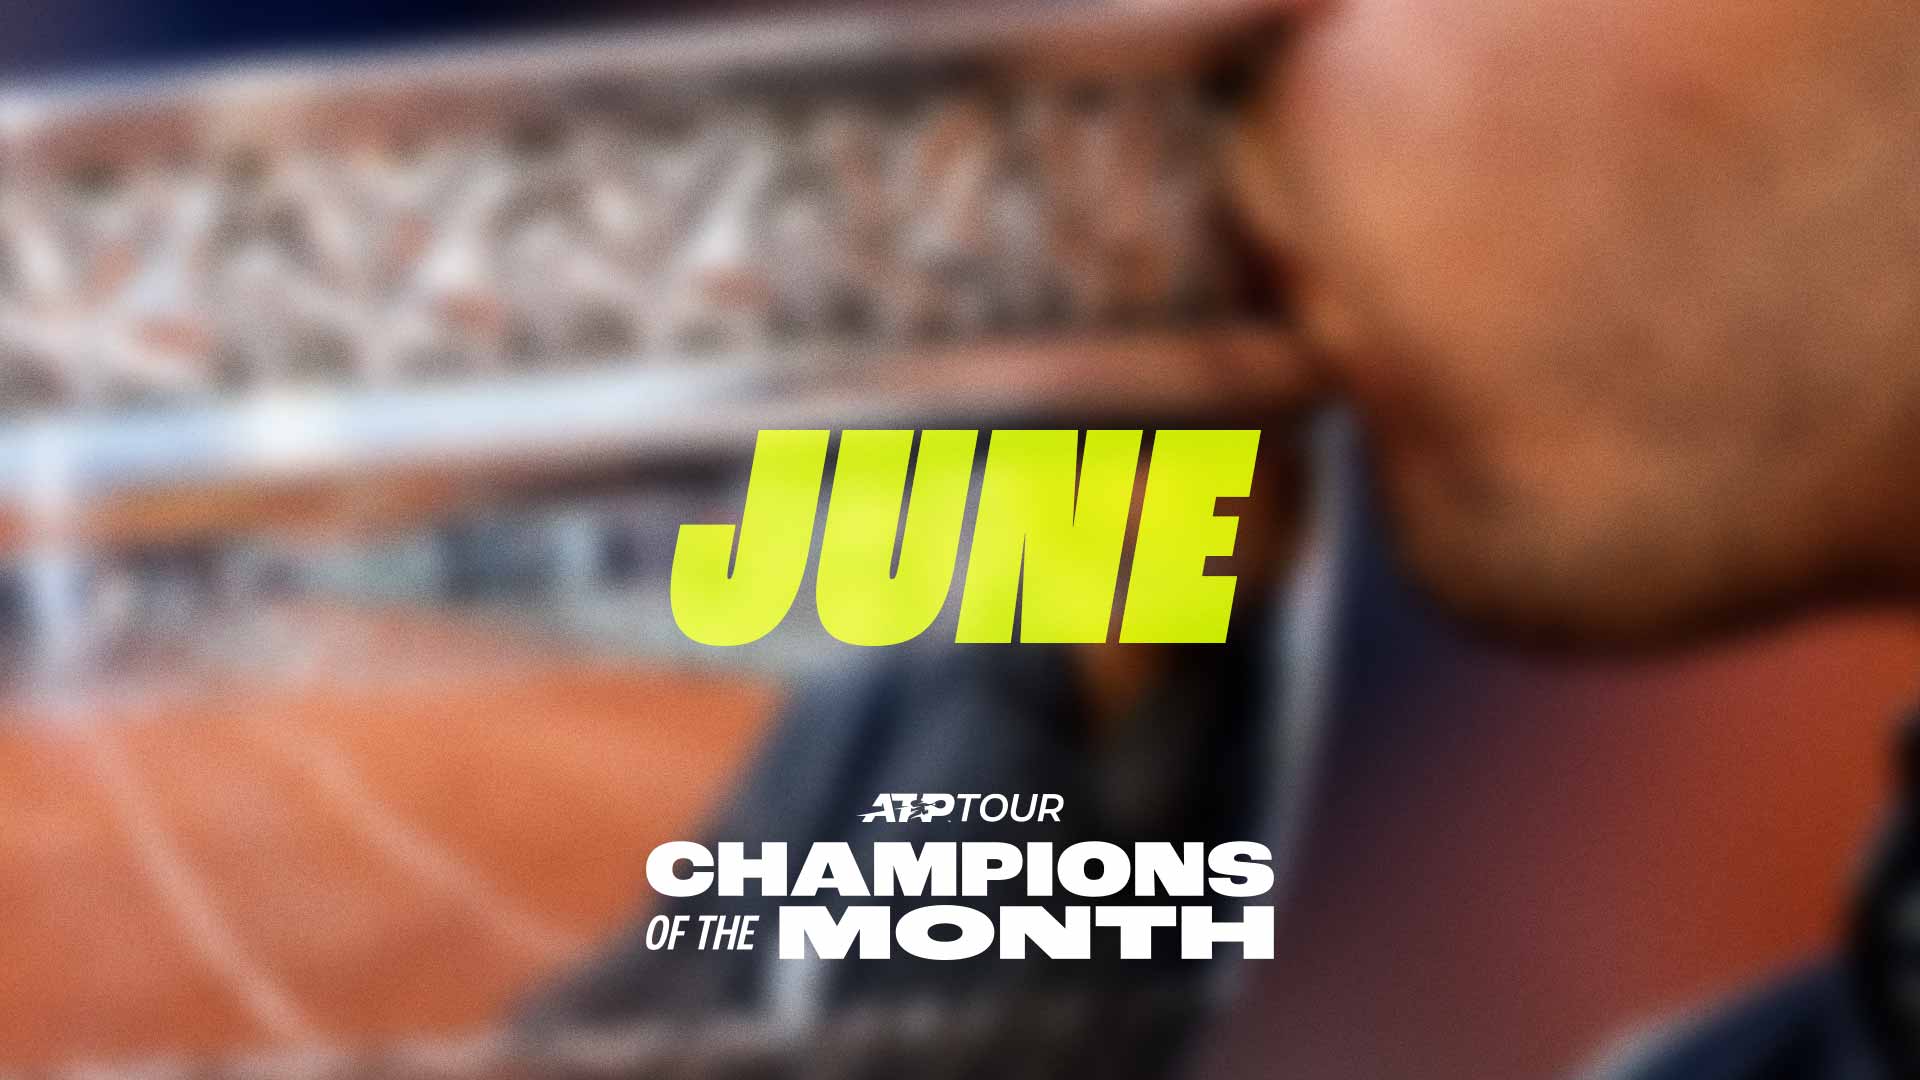 Champions of the Month: Alcaraz, Sinner shine on clay, grass